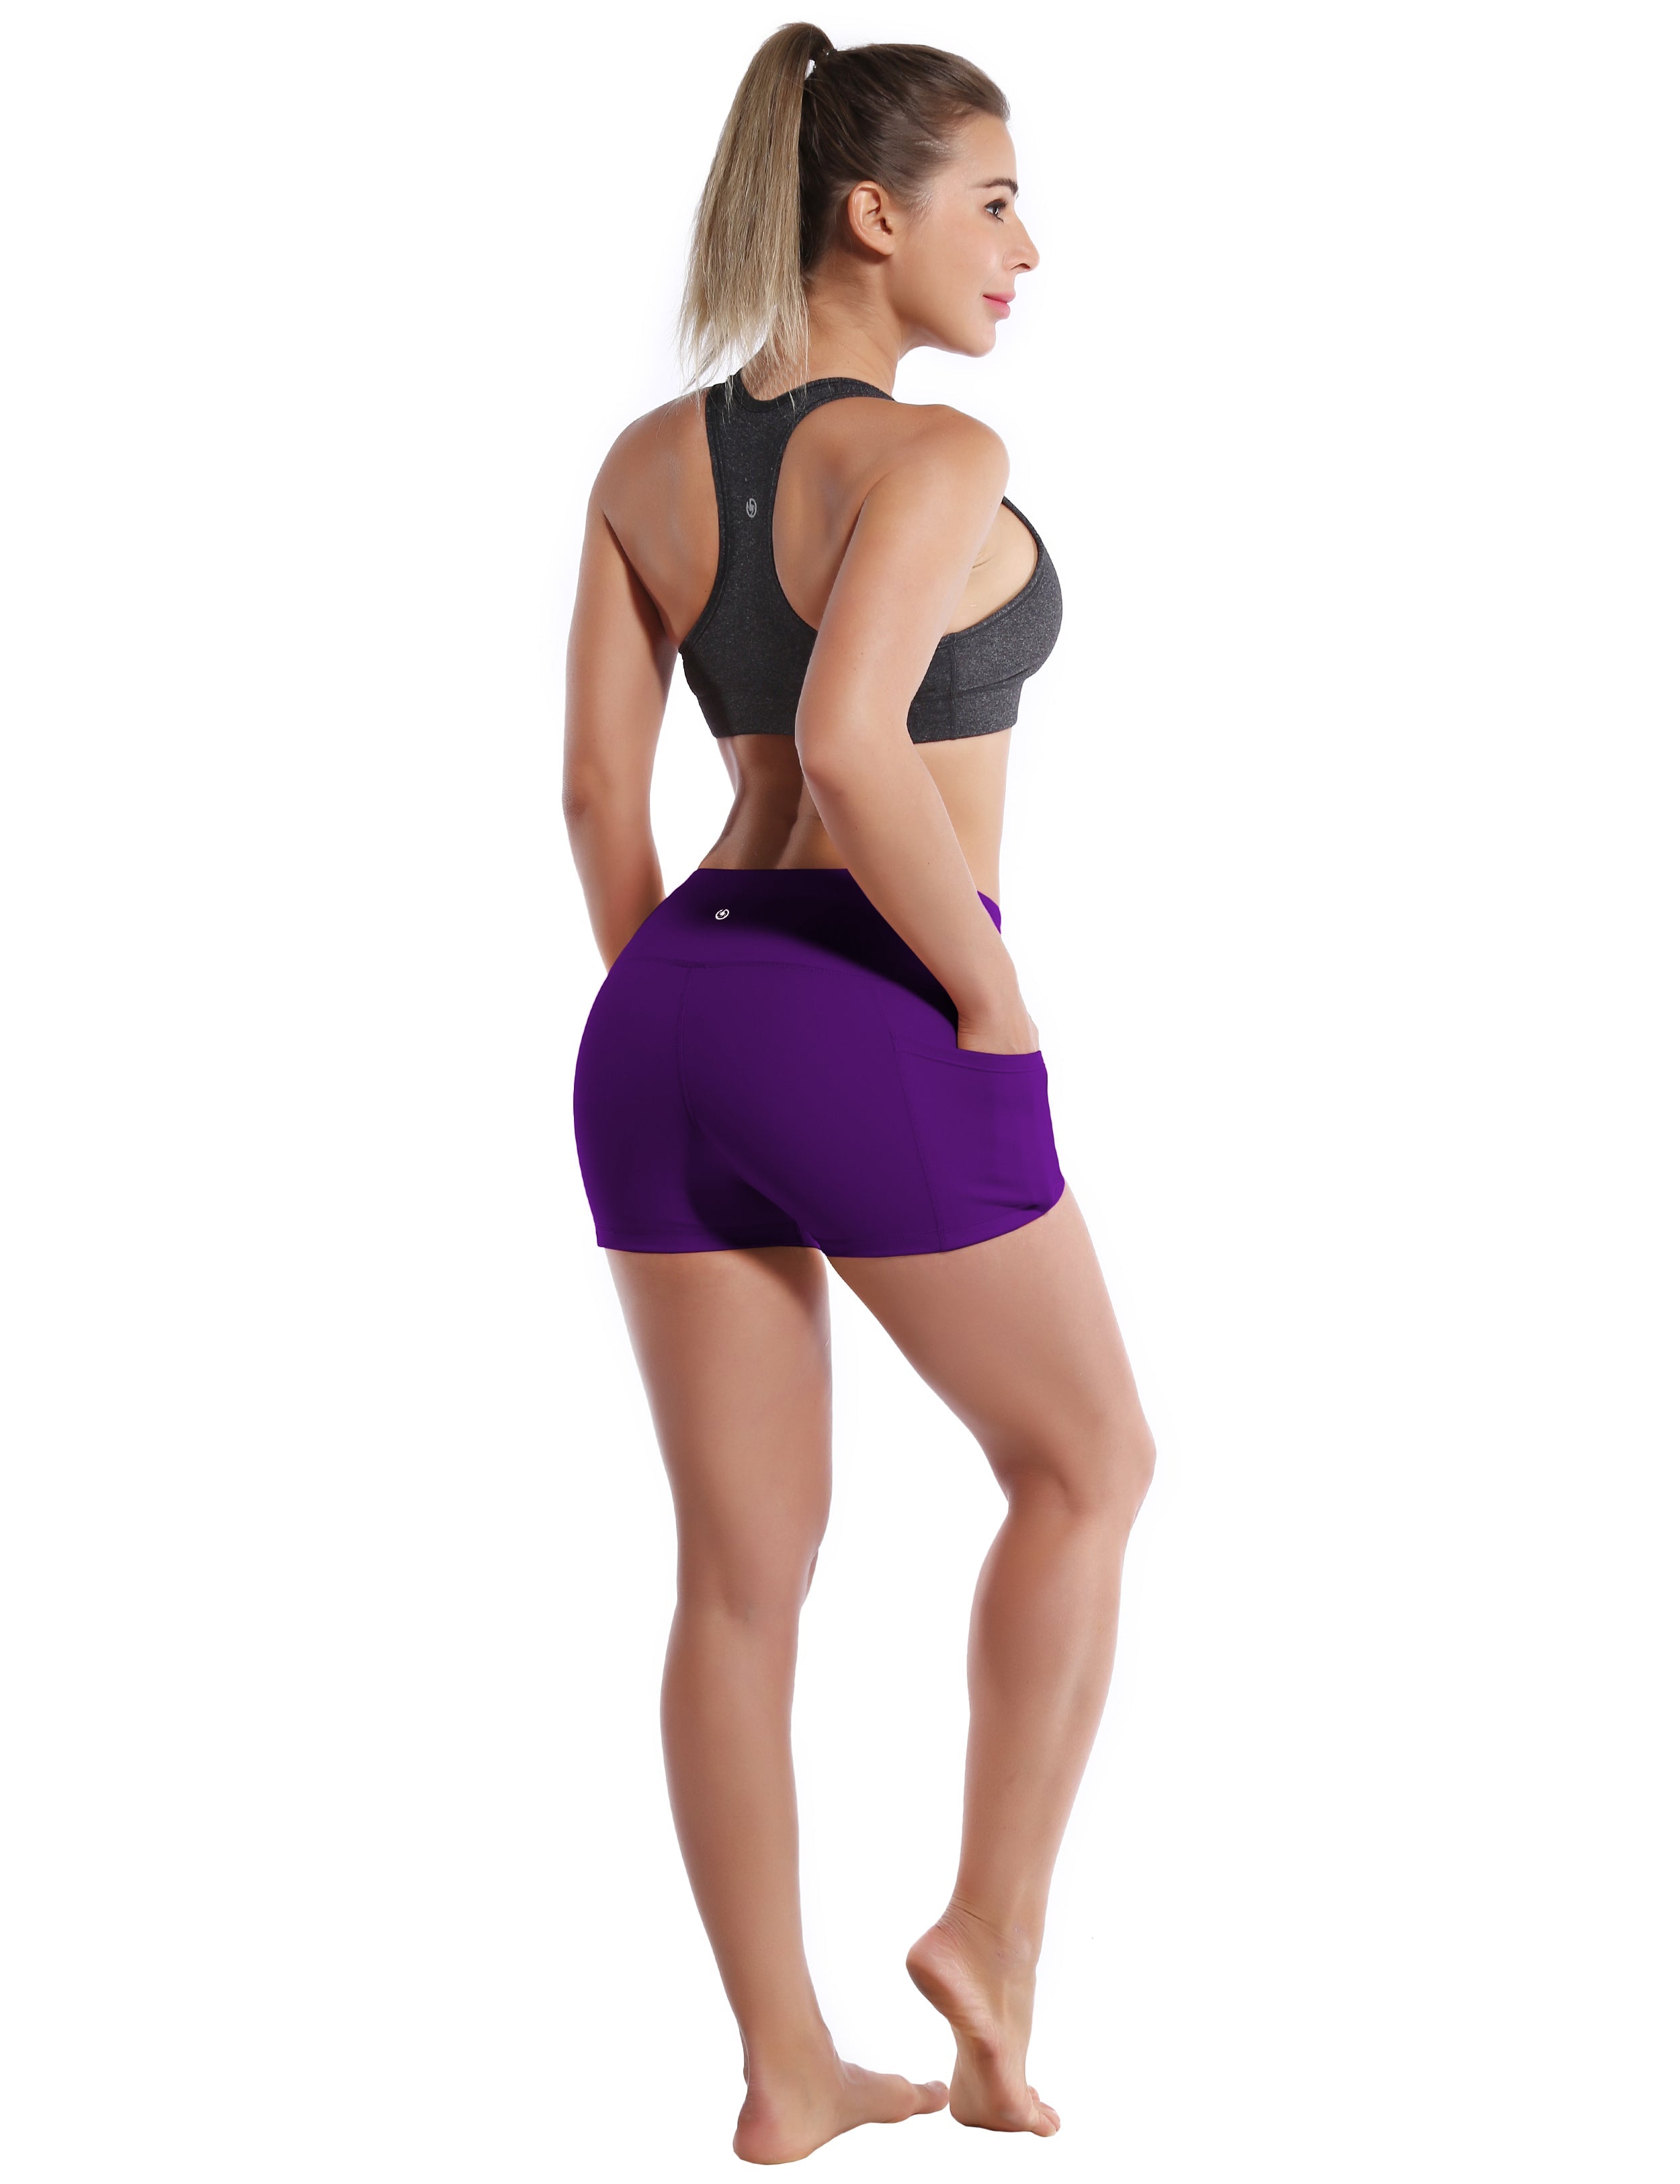 2.5" Side Pockets Jogging Shorts eggplantpurple Sleek, soft, smooth and totally comfortable: our newest sexy style is here. Softest-ever fabric High elasticity High density 4-way stretch Fabric doesn't attract lint easily No see-through Moisture-wicking Machine wash 78% Polyester, 22% Spandex